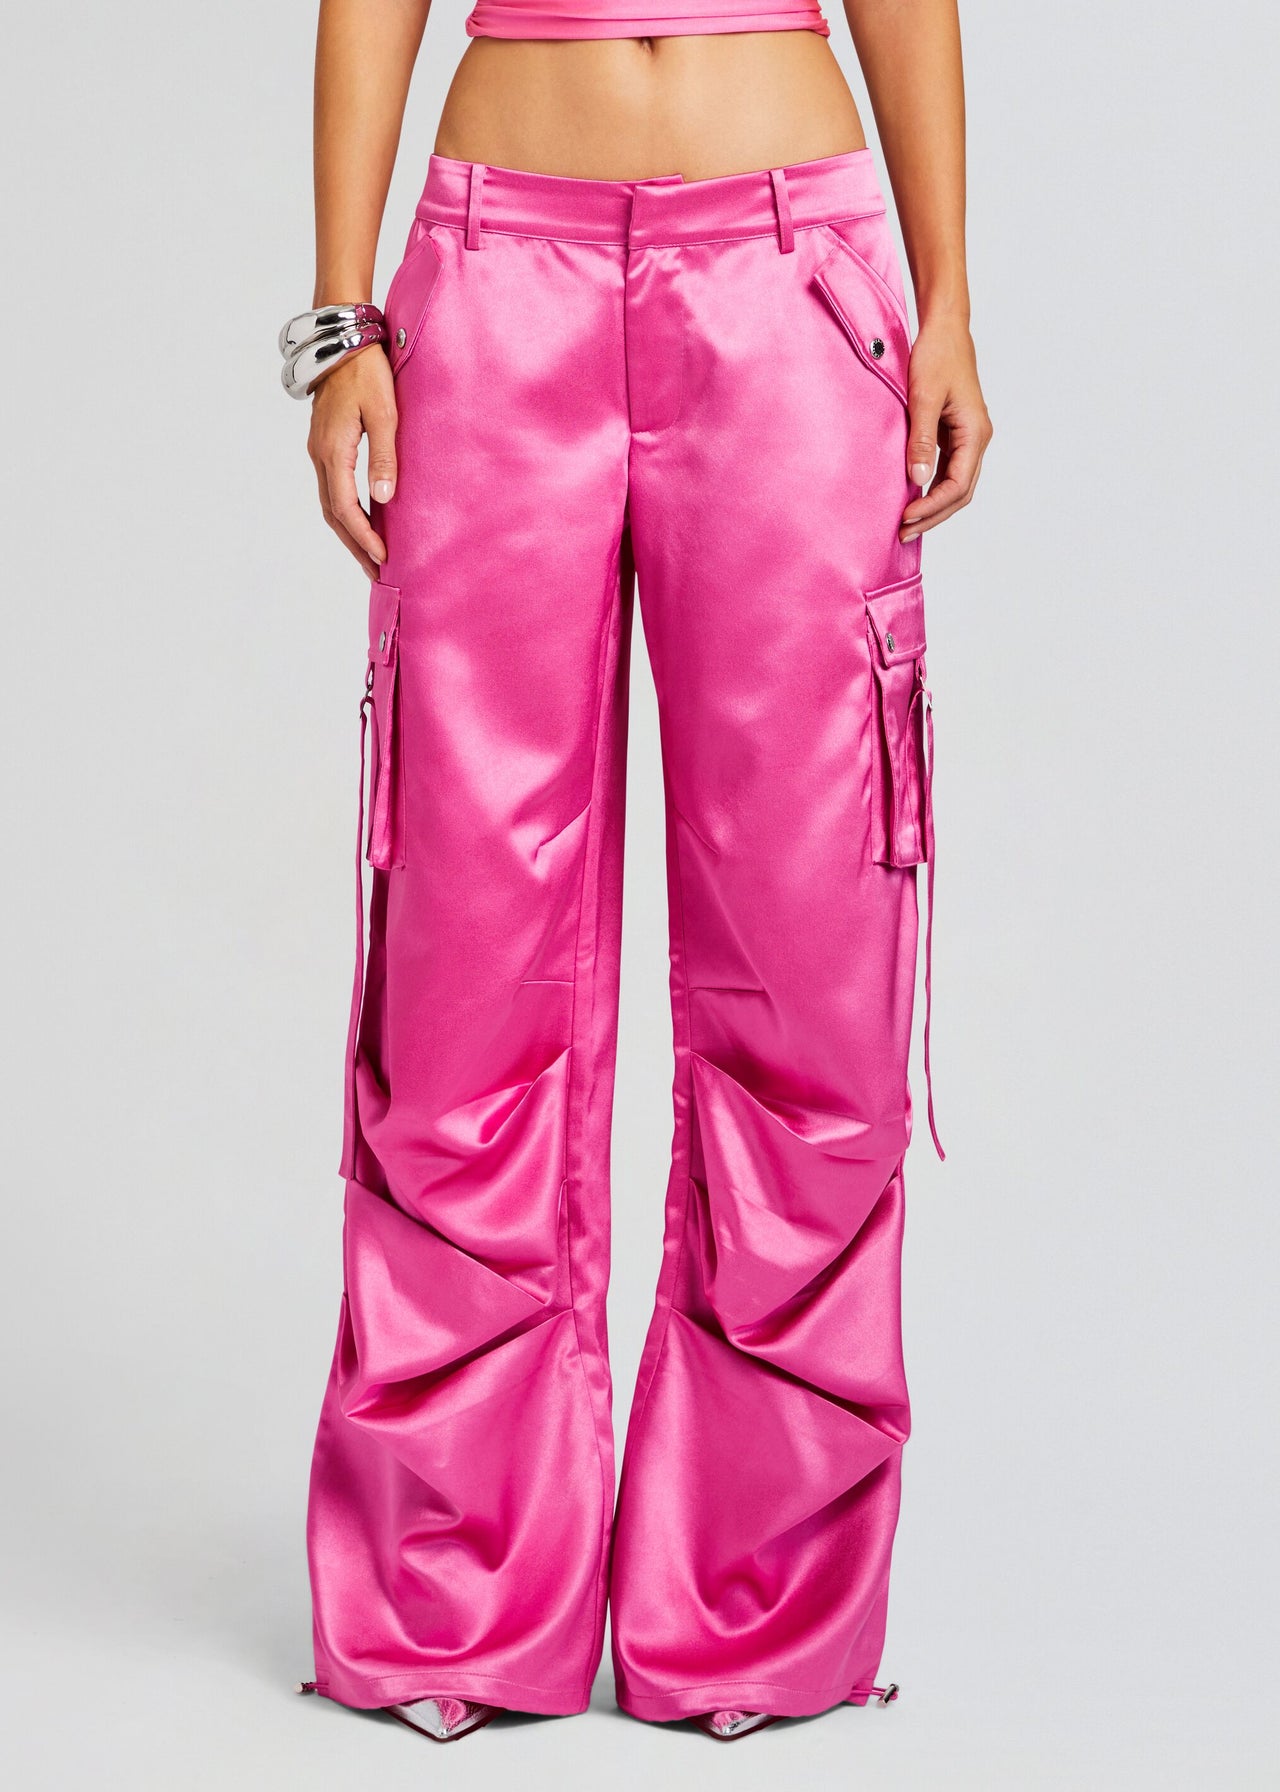 Try the Cargo Pants Trend With These Bestselling Trousers on Sale